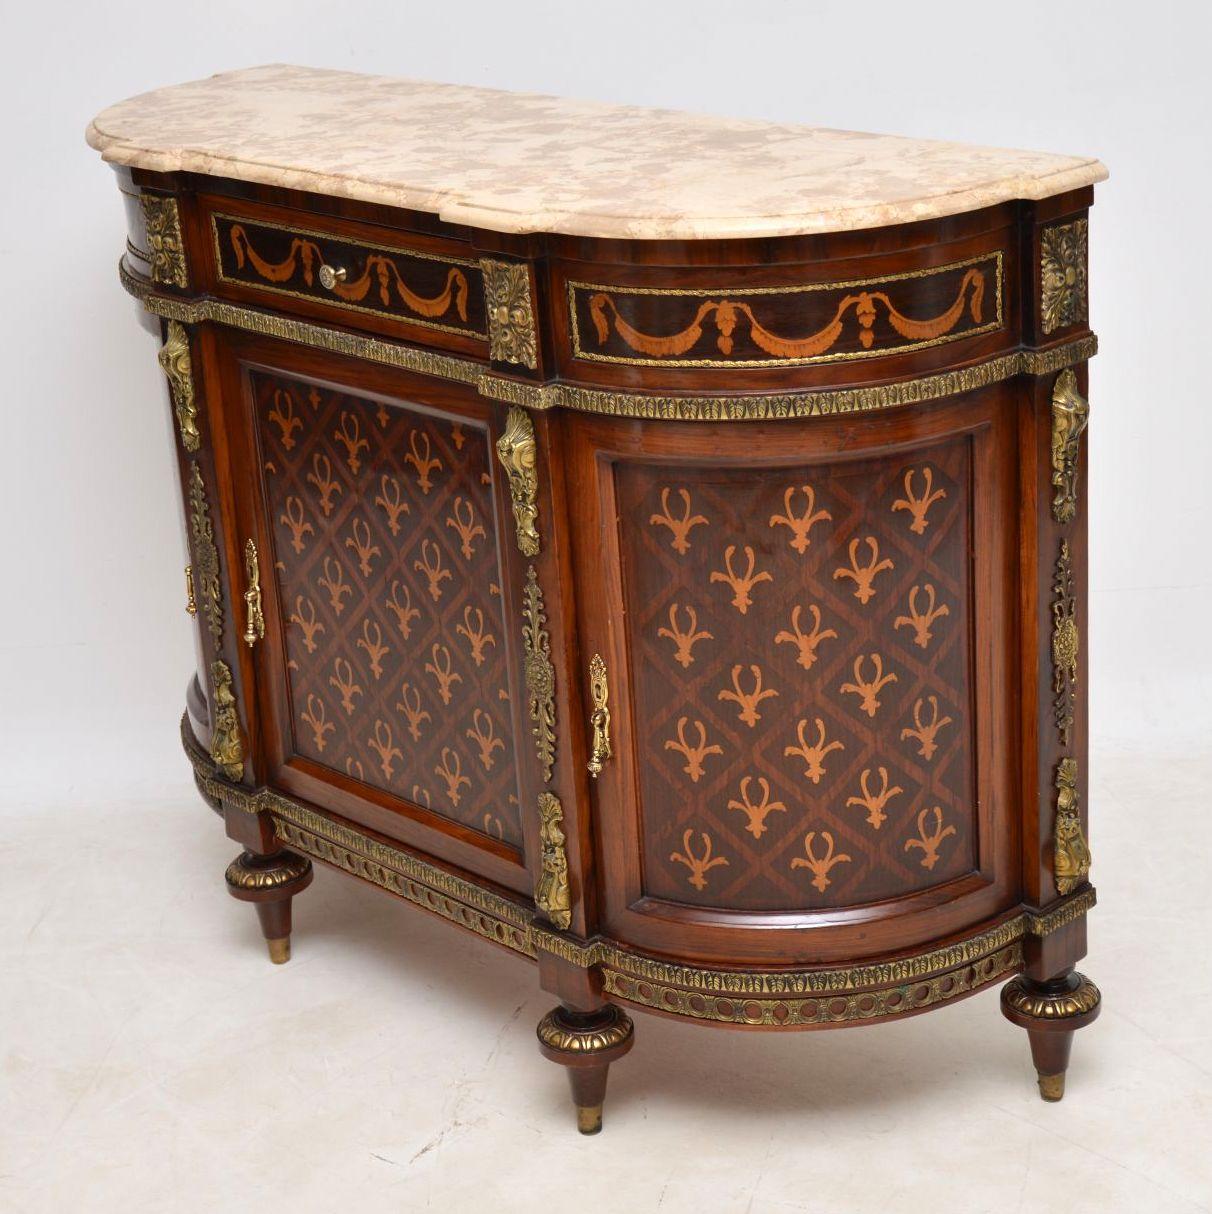 Early 20th Century Antique Swedish Inlaid Marquetry Marble-Top Cabinet